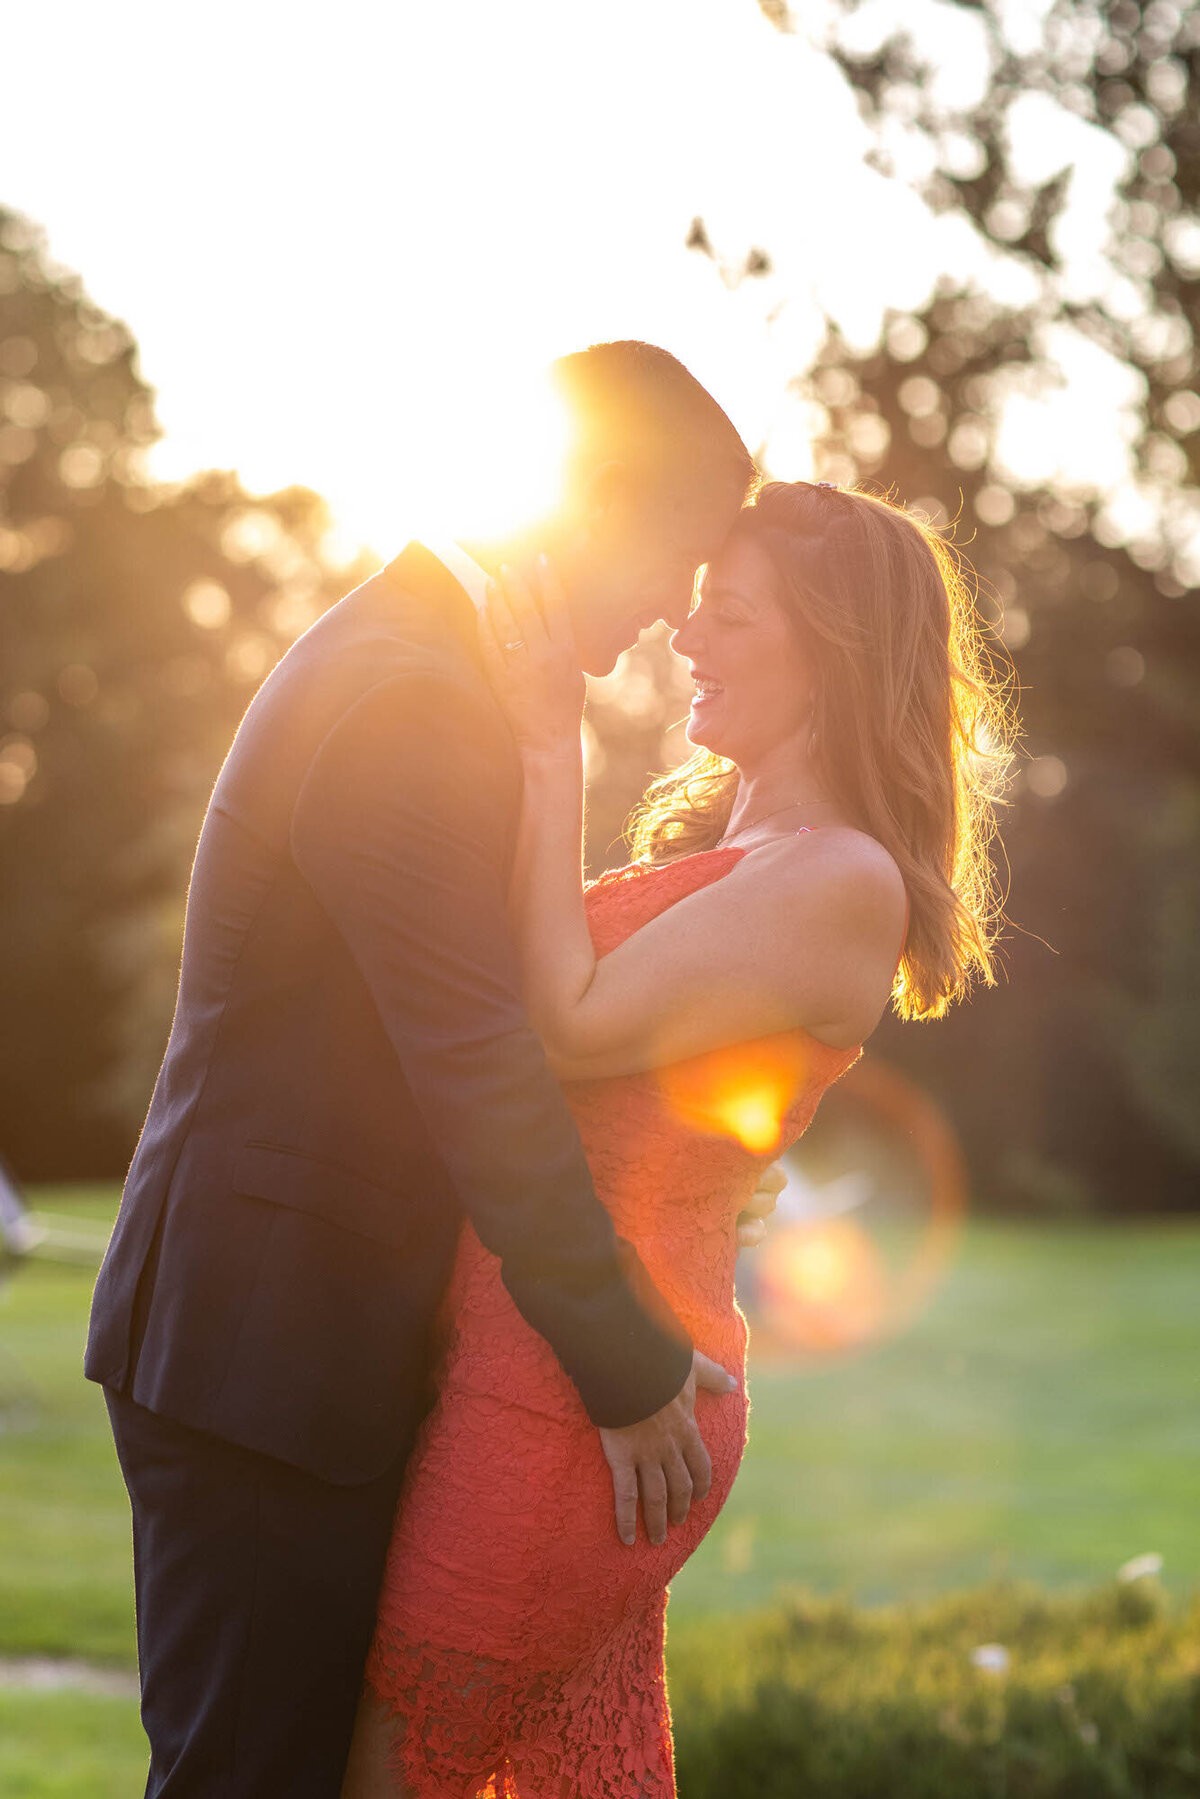 Couple embracing at dusk in outdoor engagement session